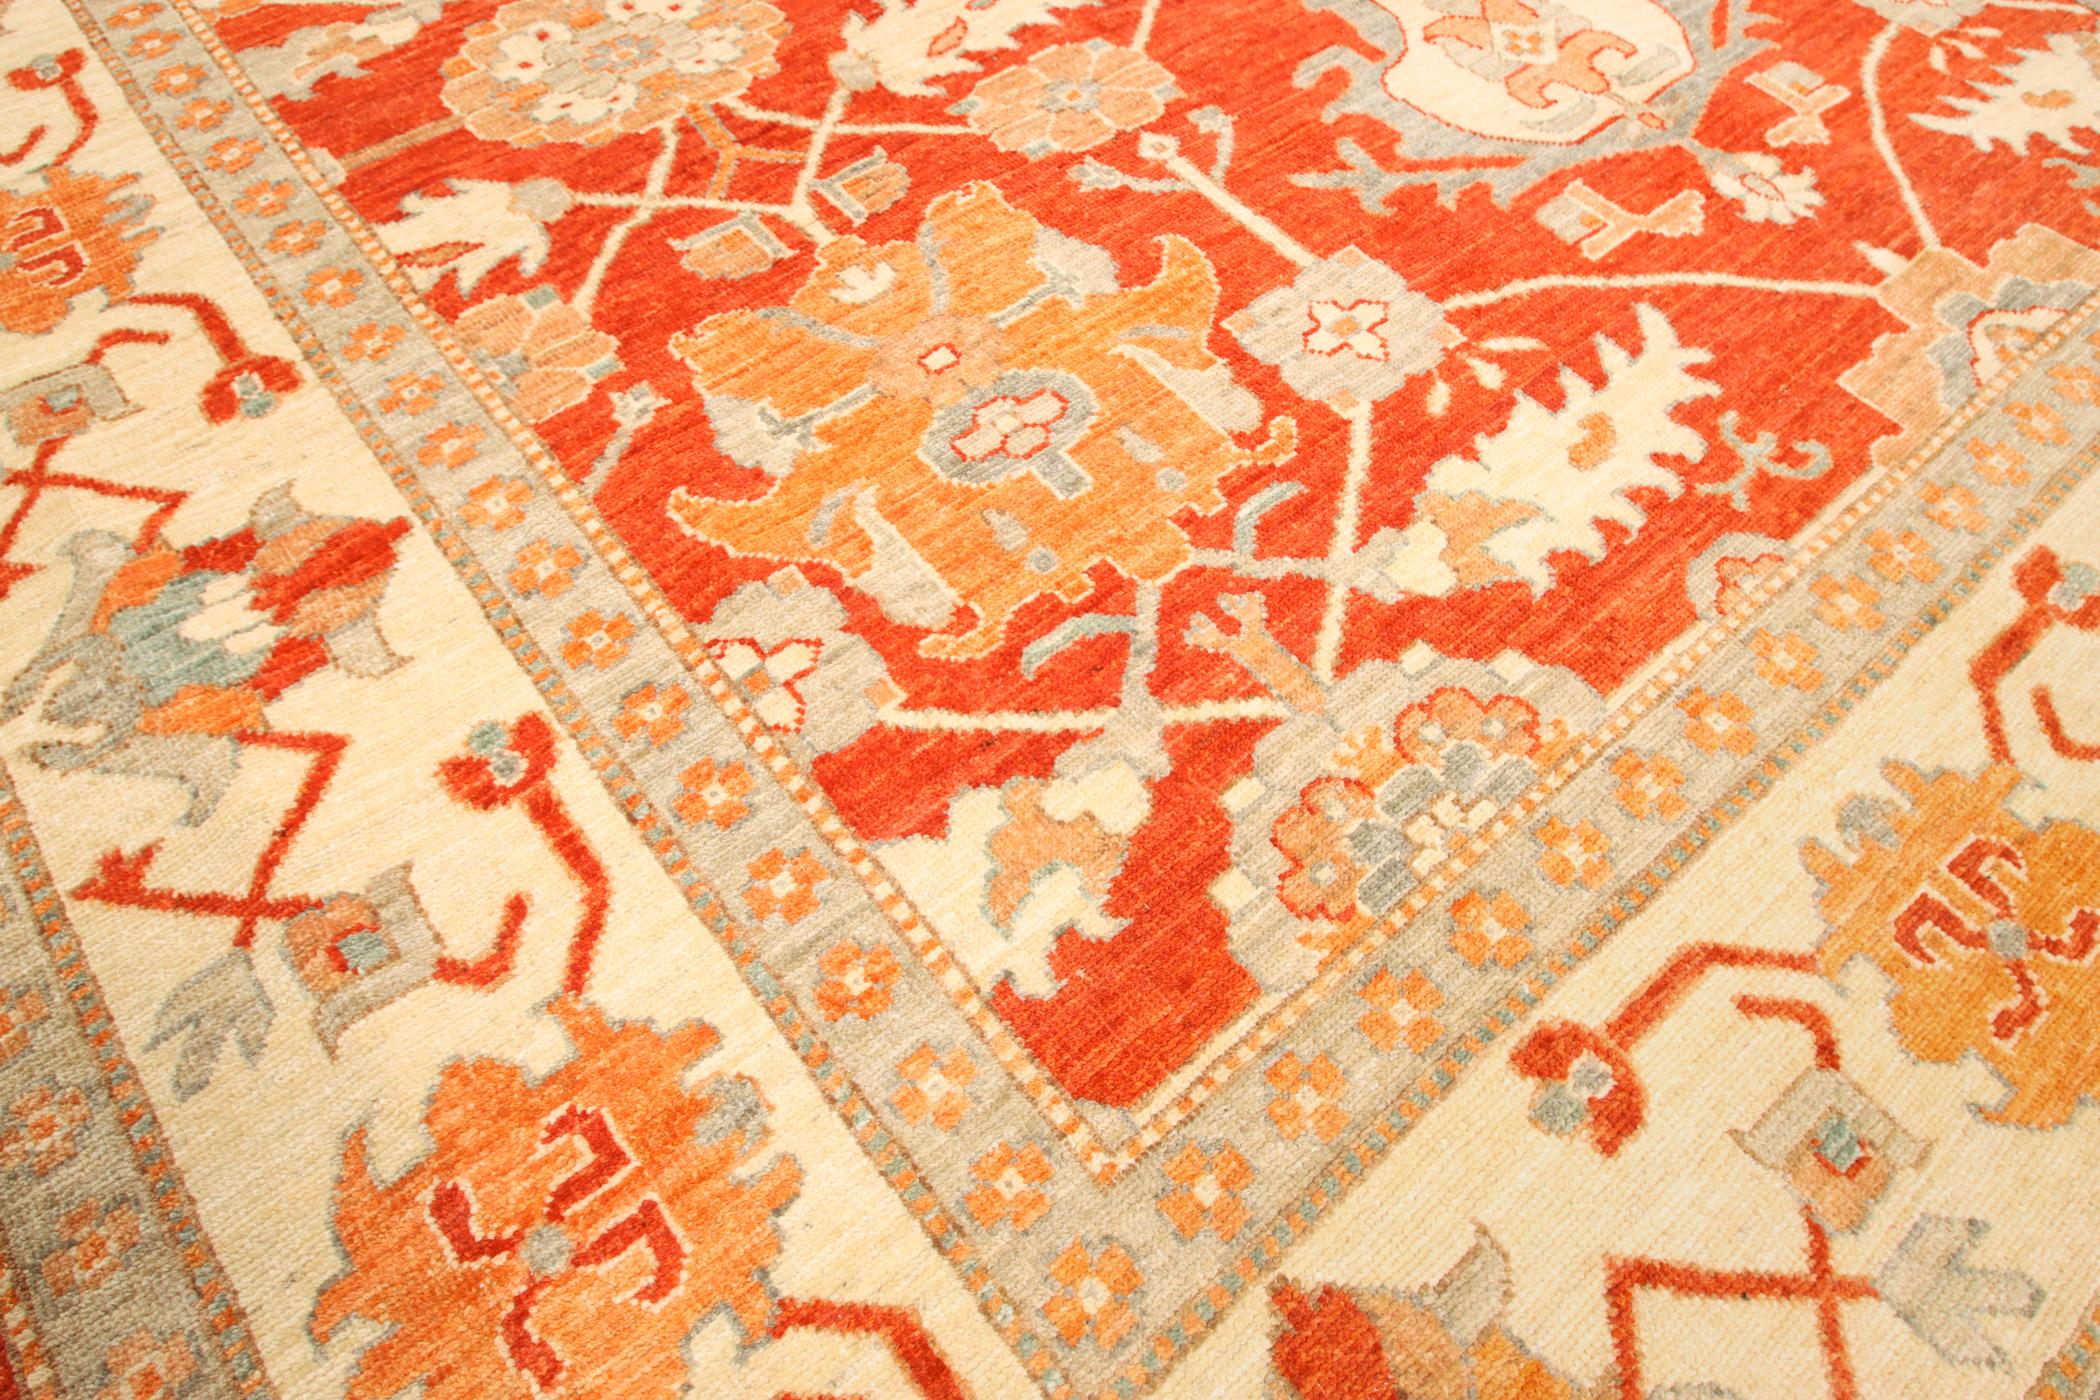 Nice hand made carpet by Turkoman weavers in Afghanistan all natural dyes and hand spun wool.
Ushak style carpet.